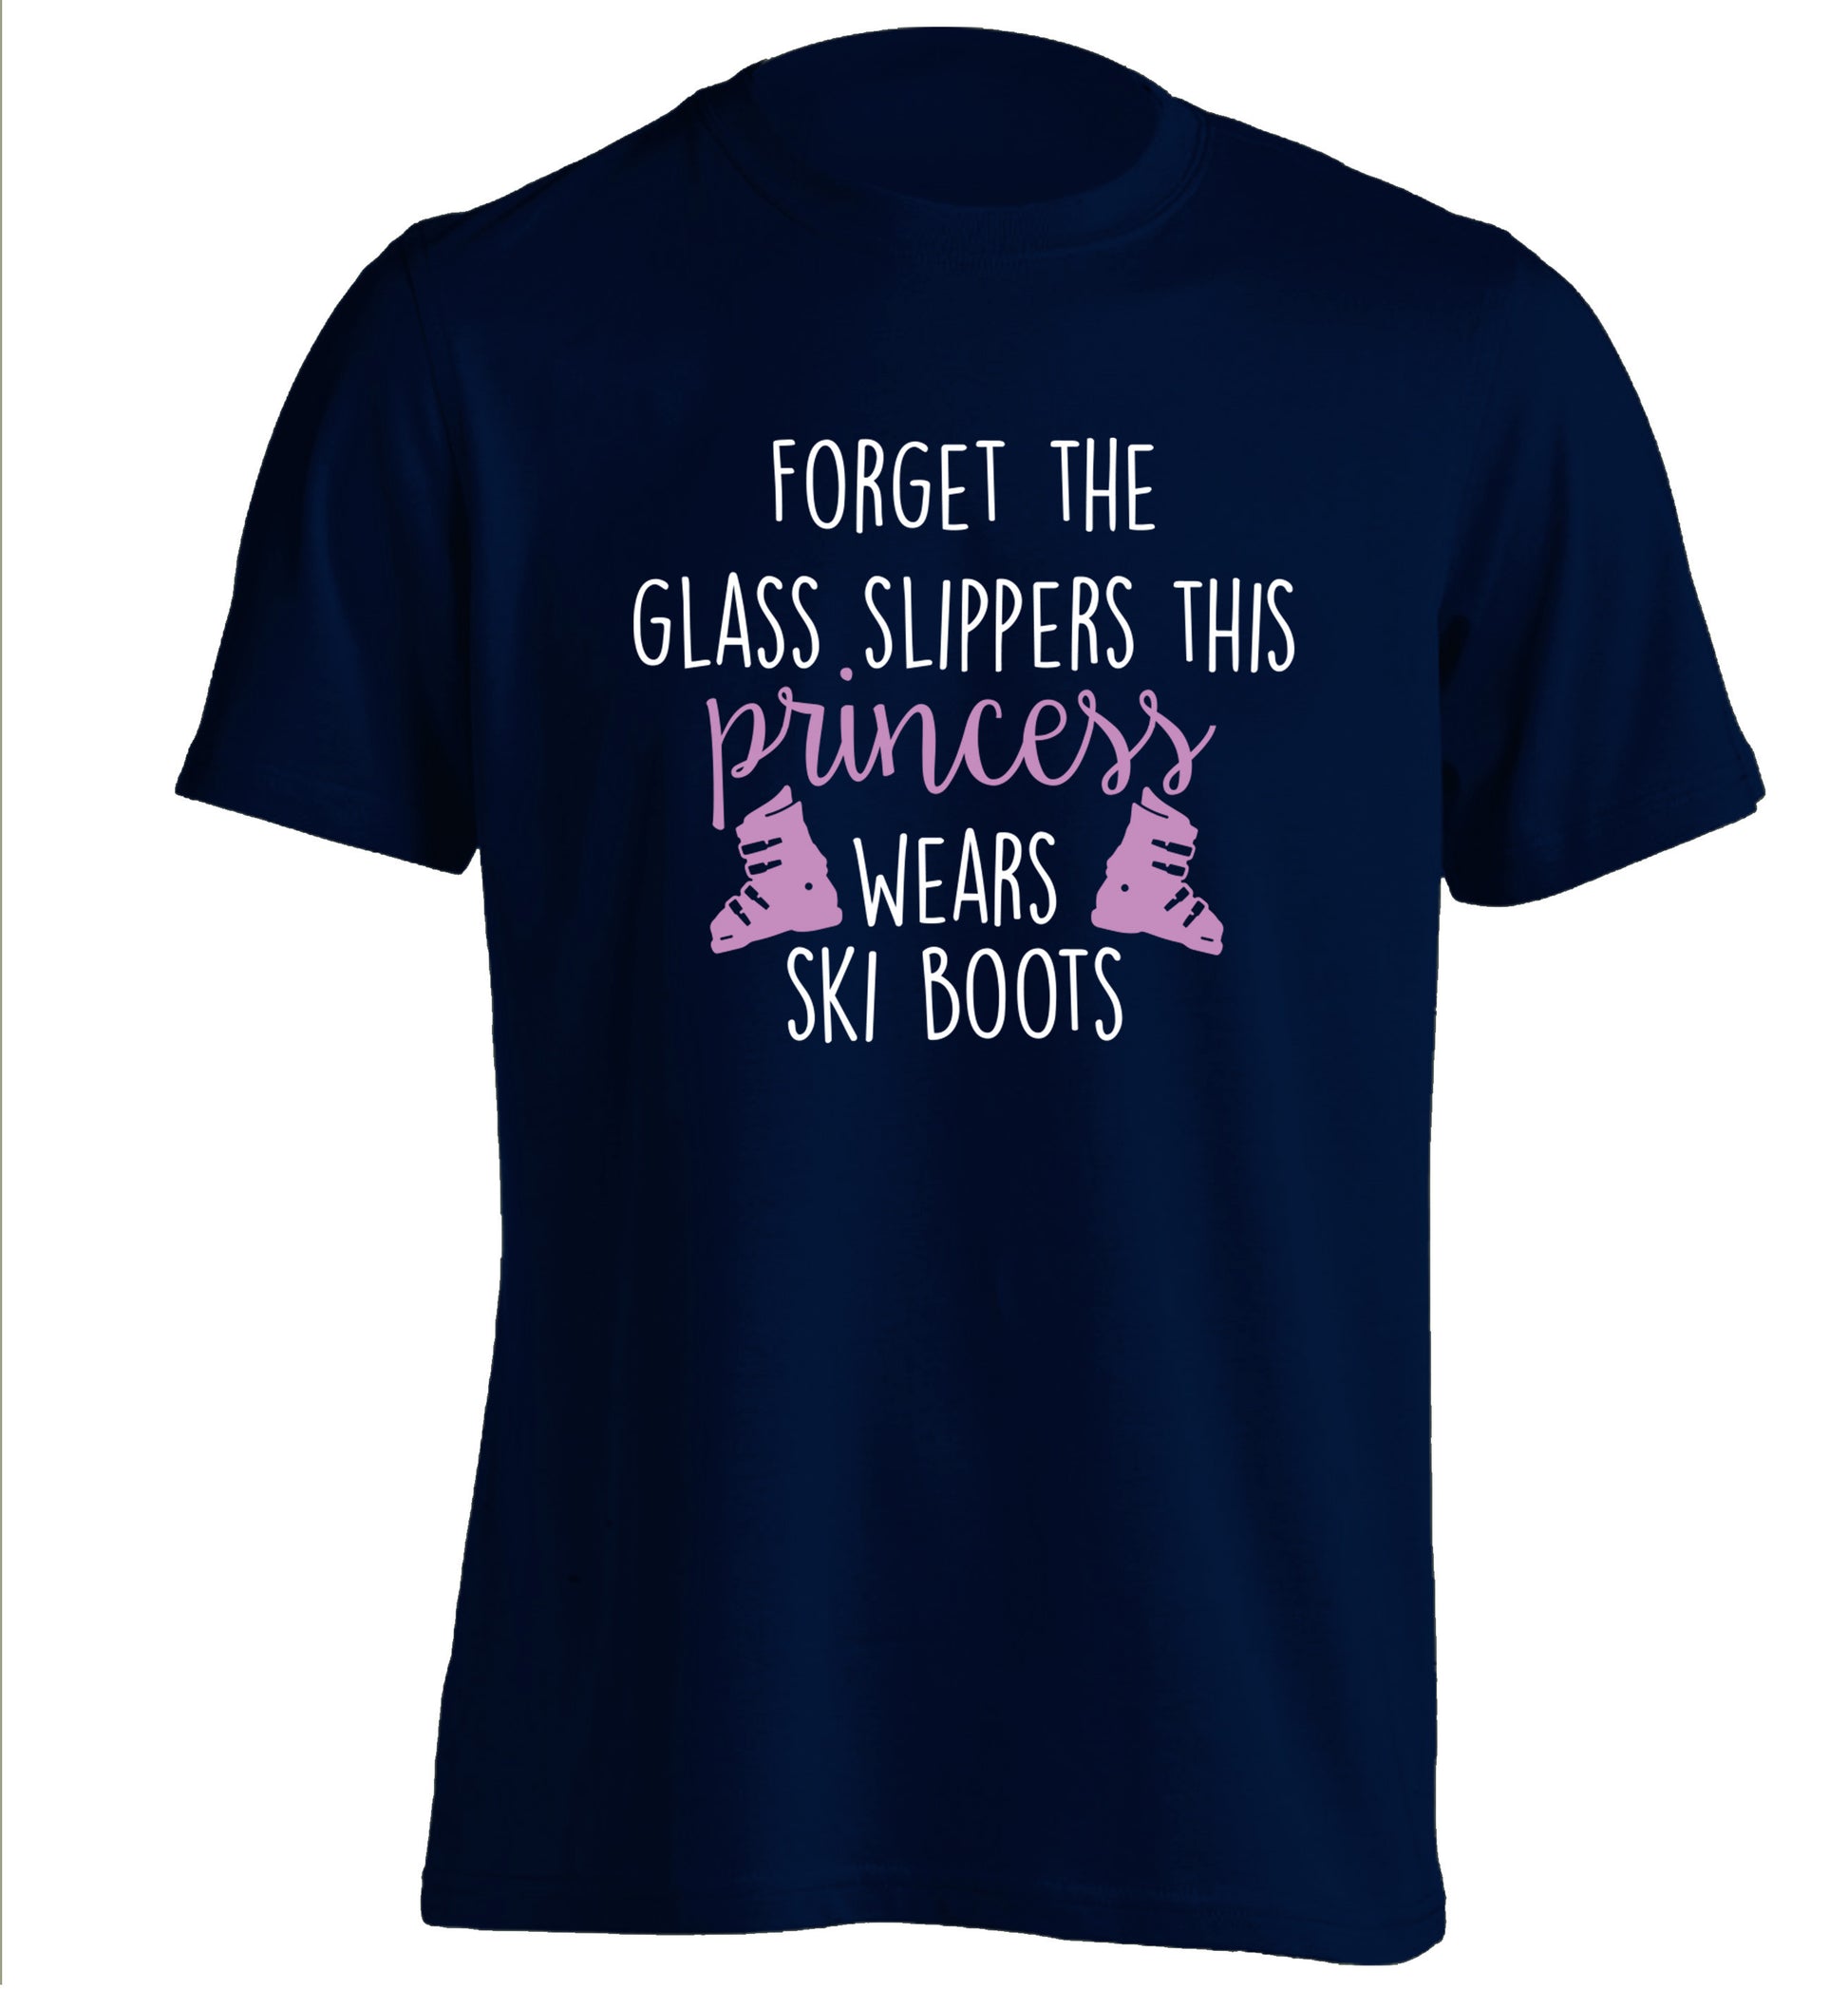 Forget the glass slippers this princess wears ski boots adults unisex navy Tshirt 2XL